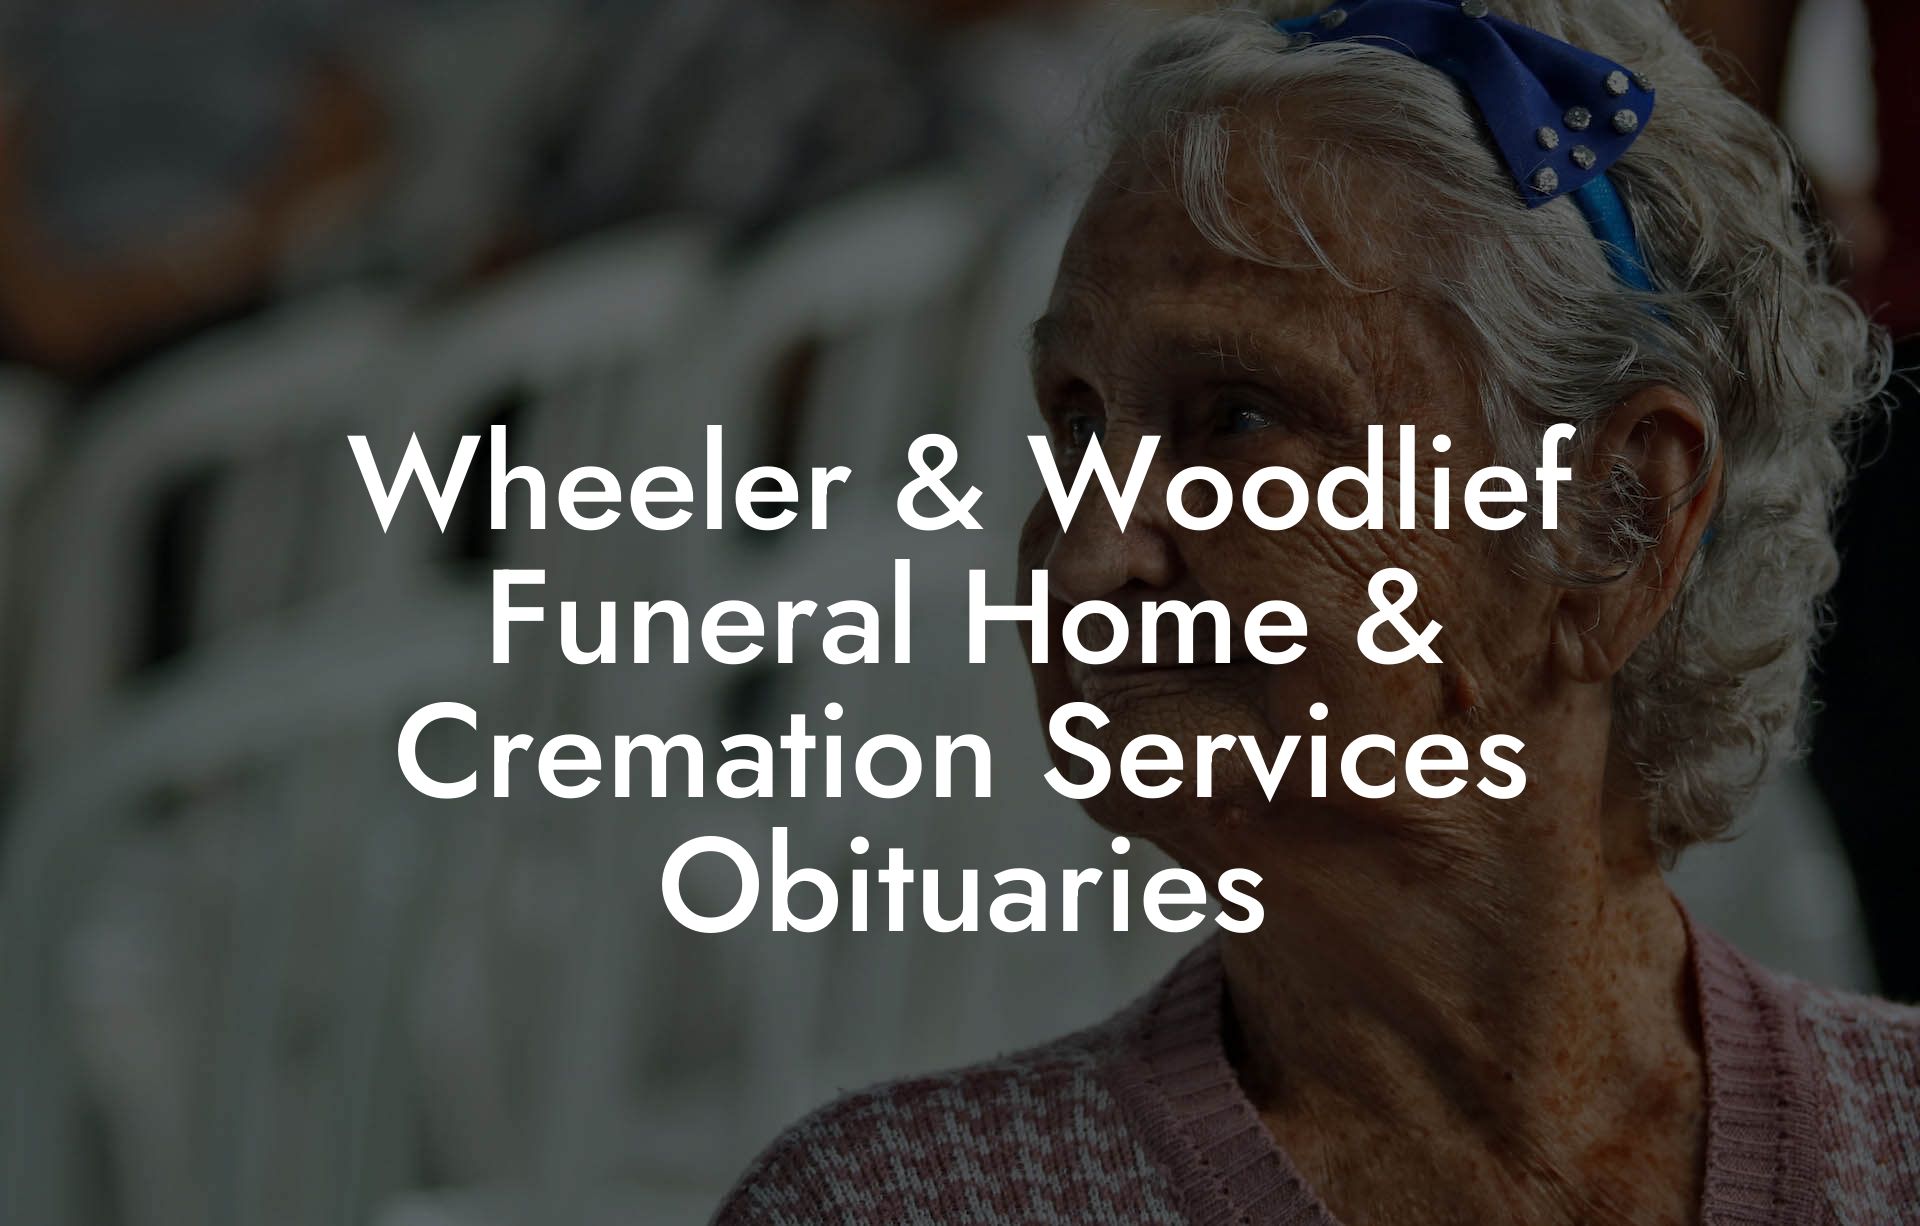 Wheeler & Woodlief Funeral Home & Cremation Services Obituaries